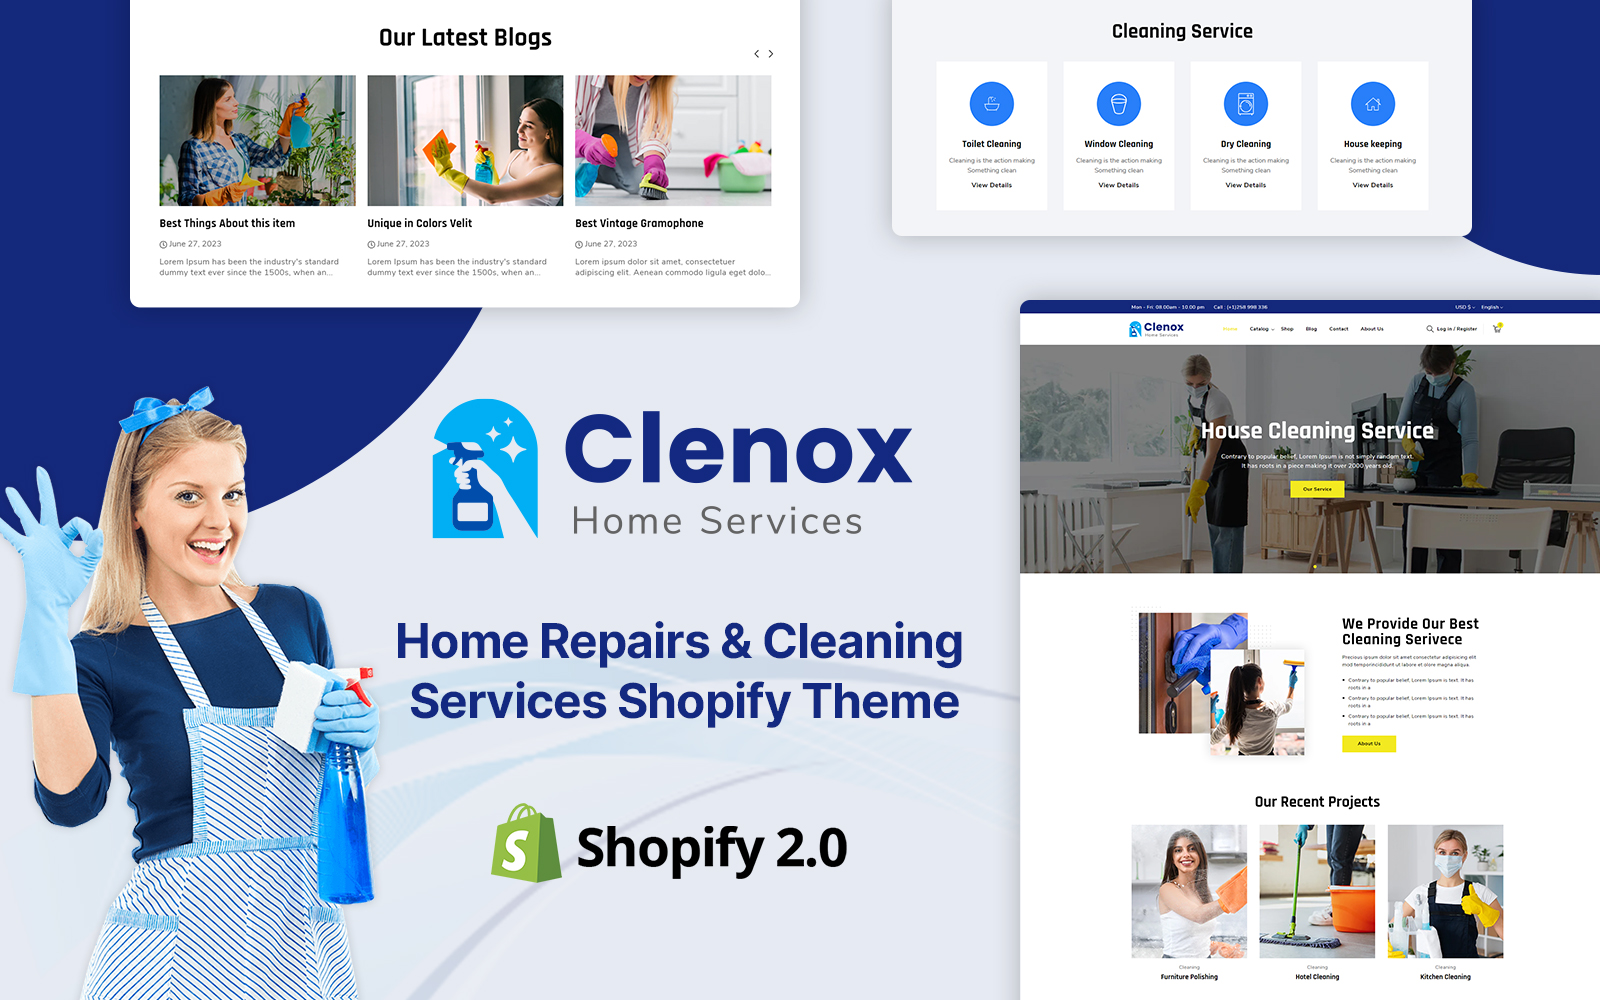 Clenox - Home Repair and Cleaning Service Shopify Theme